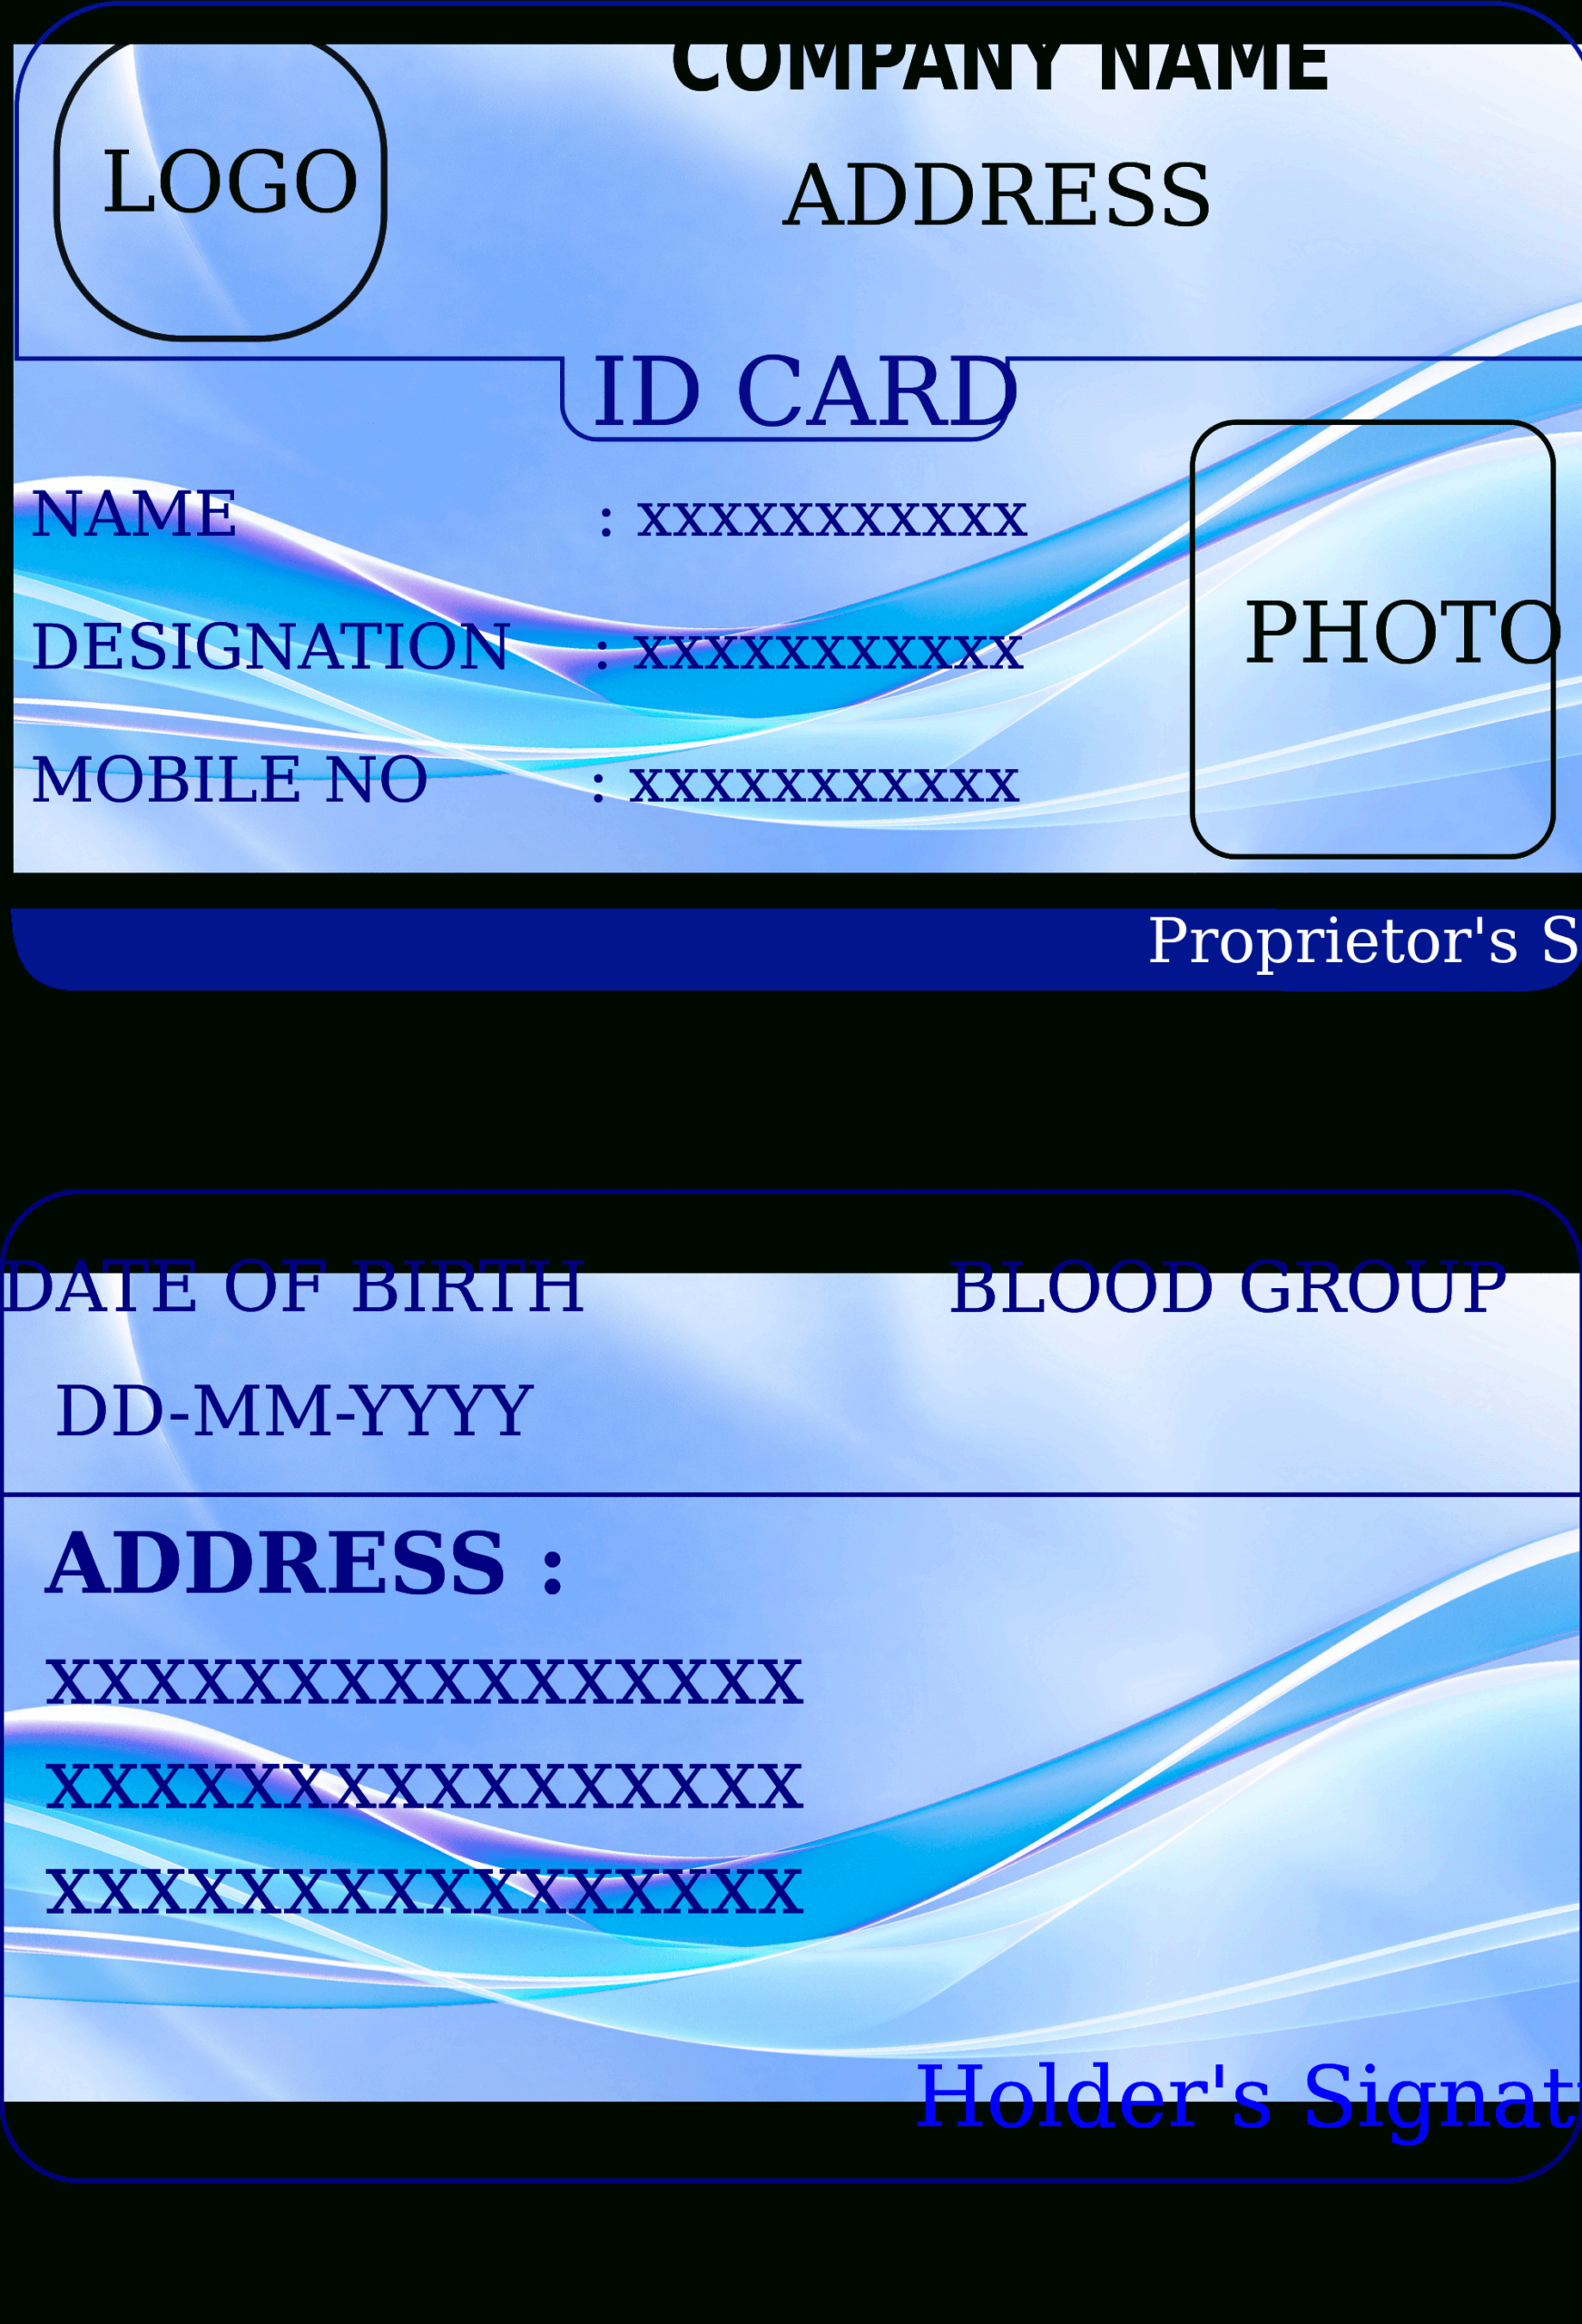 state-id-card-template-calep-midnightpig-co-throughout-id-card